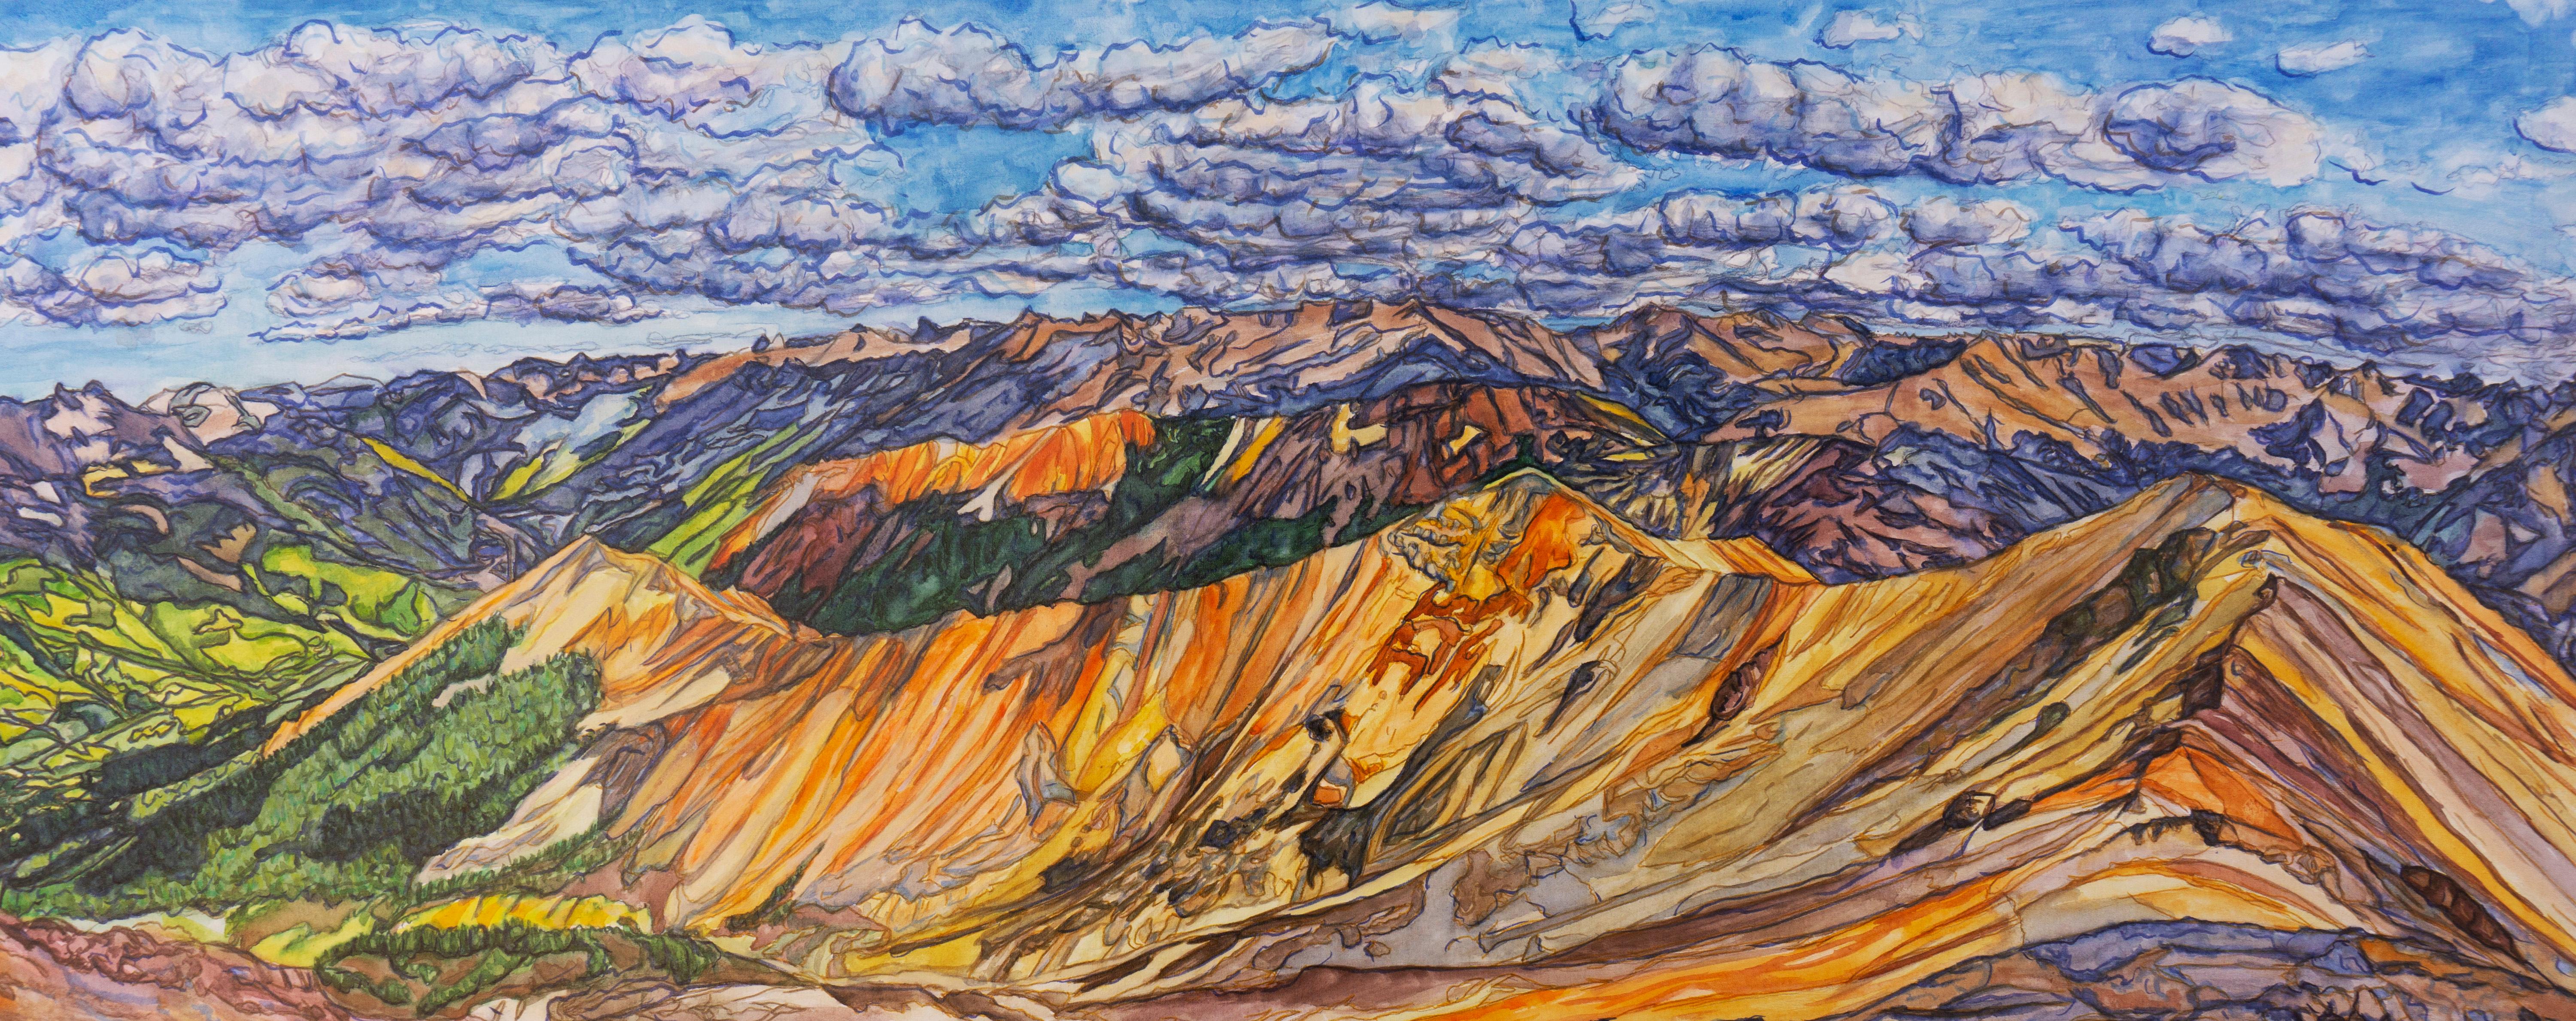 Red Mountain Summit, Original Painting - Mixed Media Art by Crystal DiPietro